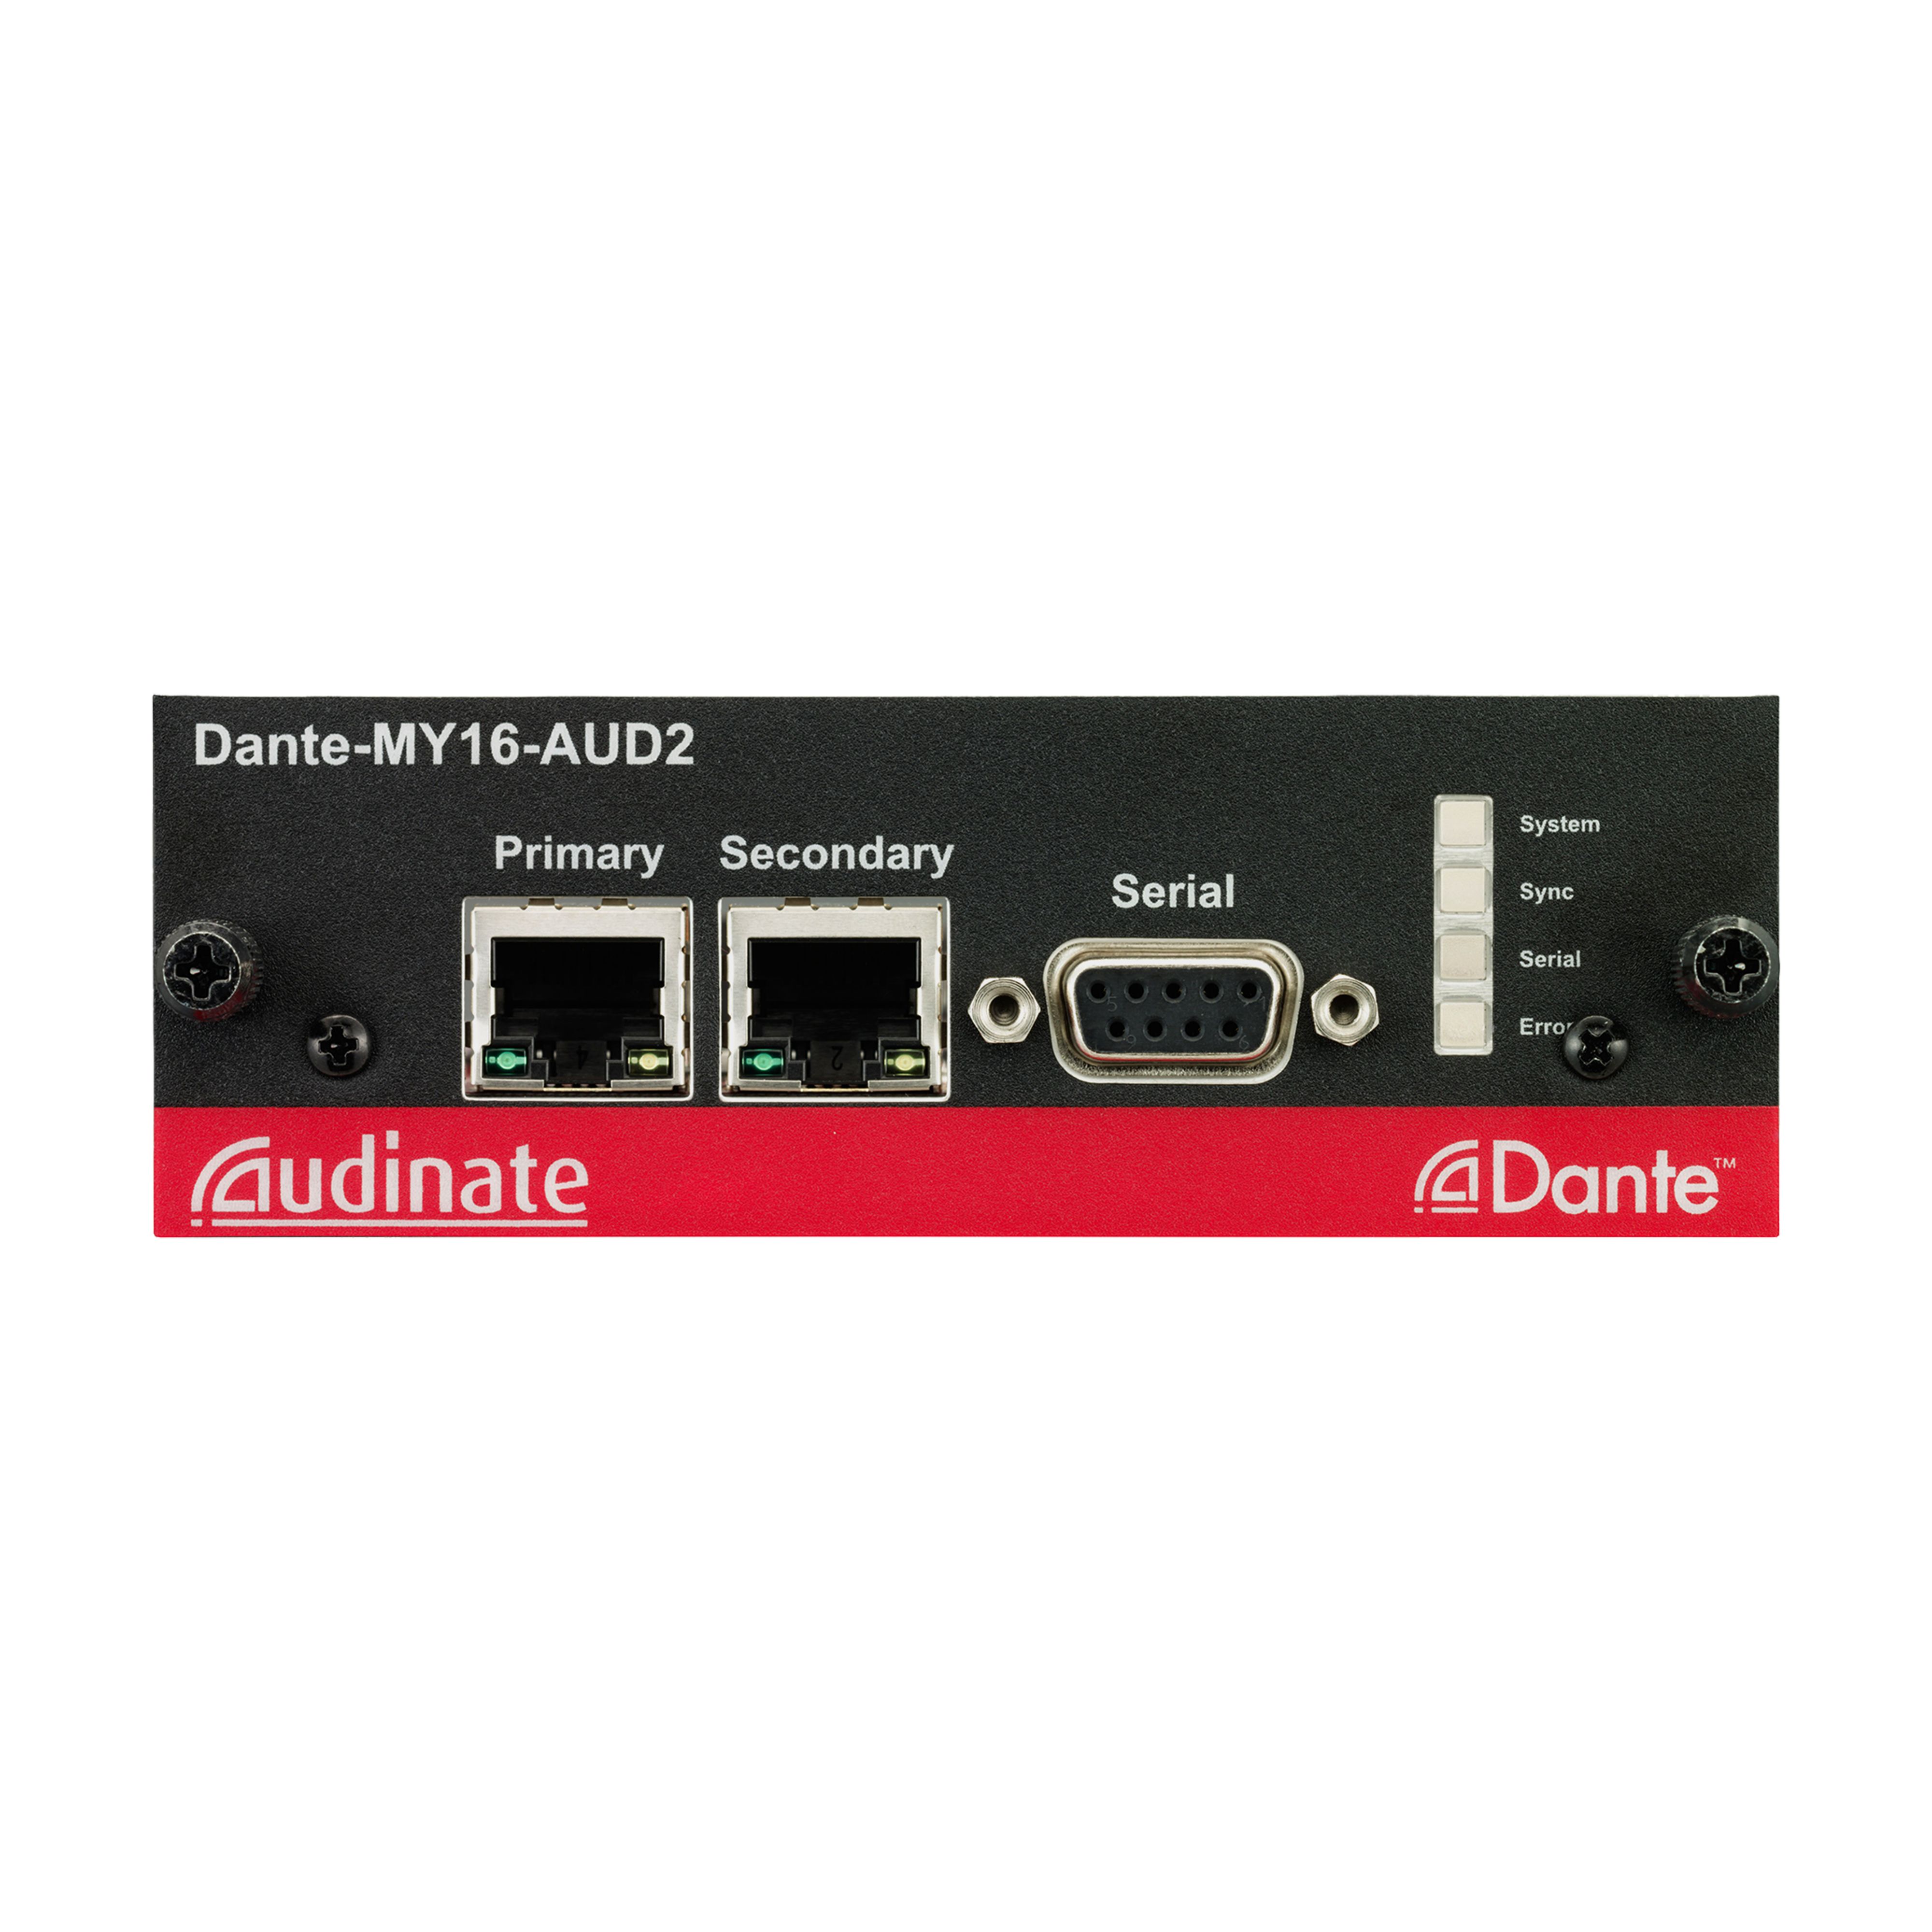 DANTE-MY16-AUD2 - Overview - Interfaces - Professional Audio 